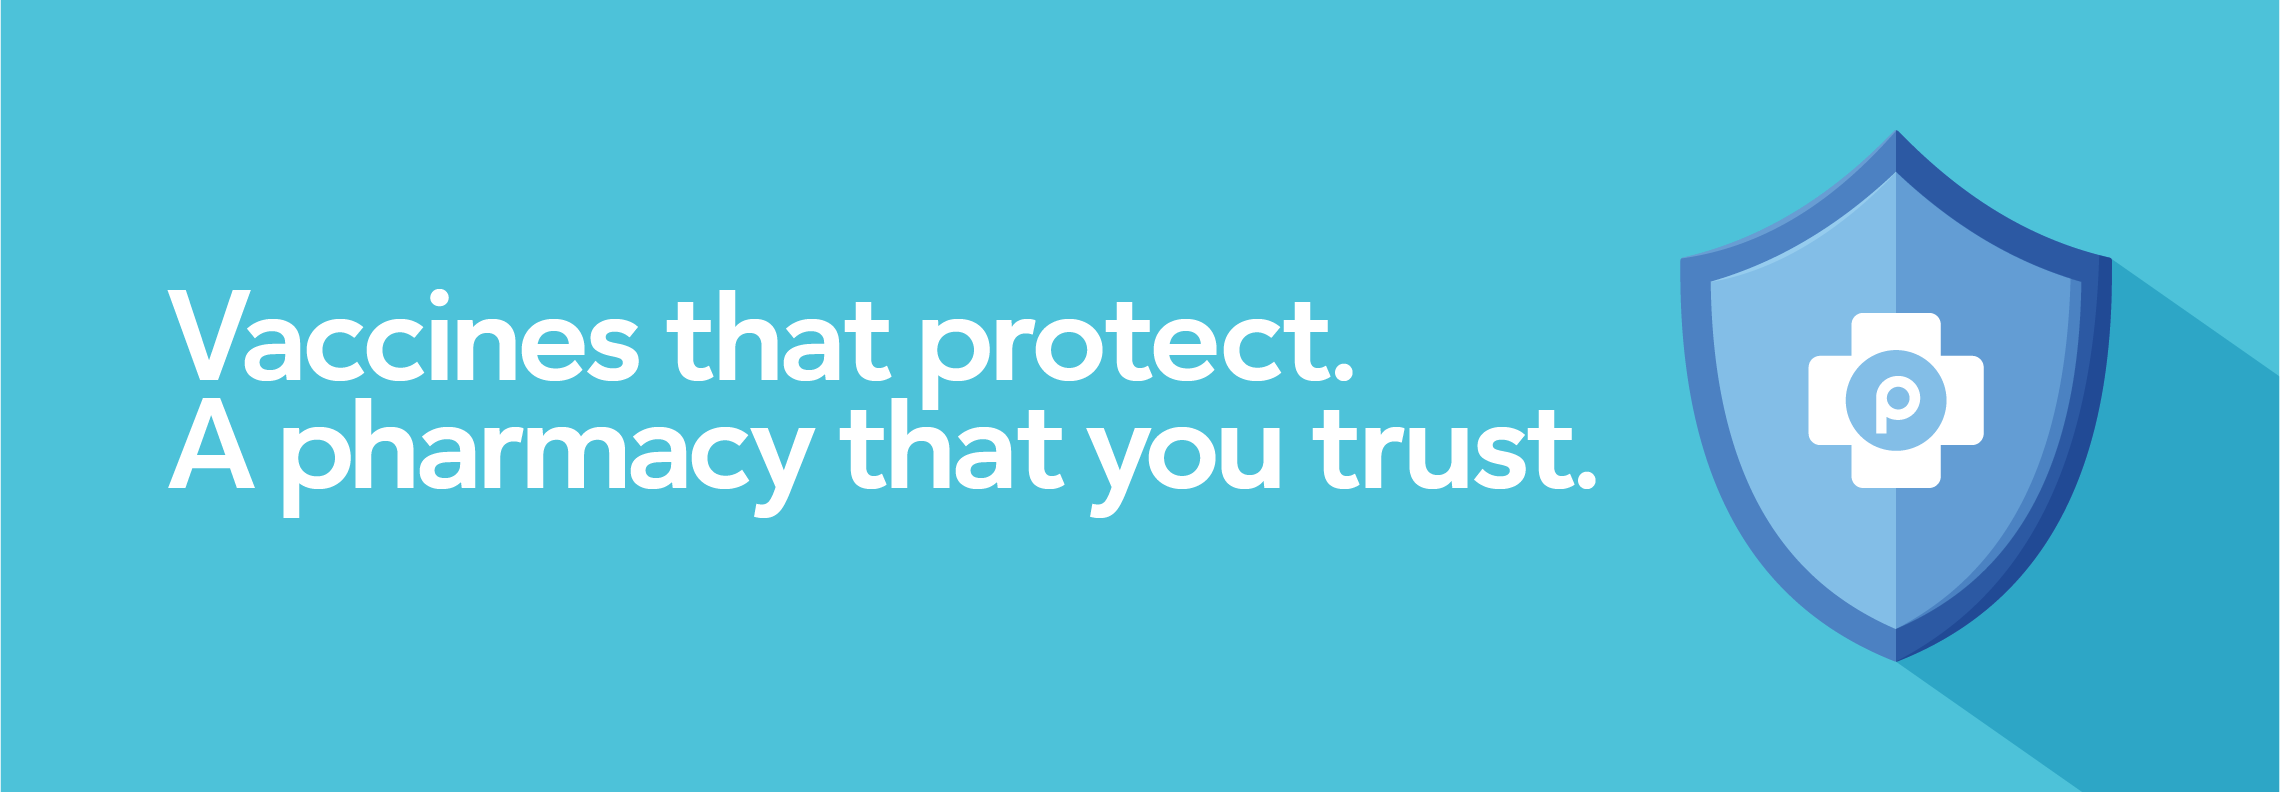 Vaccines that protect. A pharmacy that you trust.